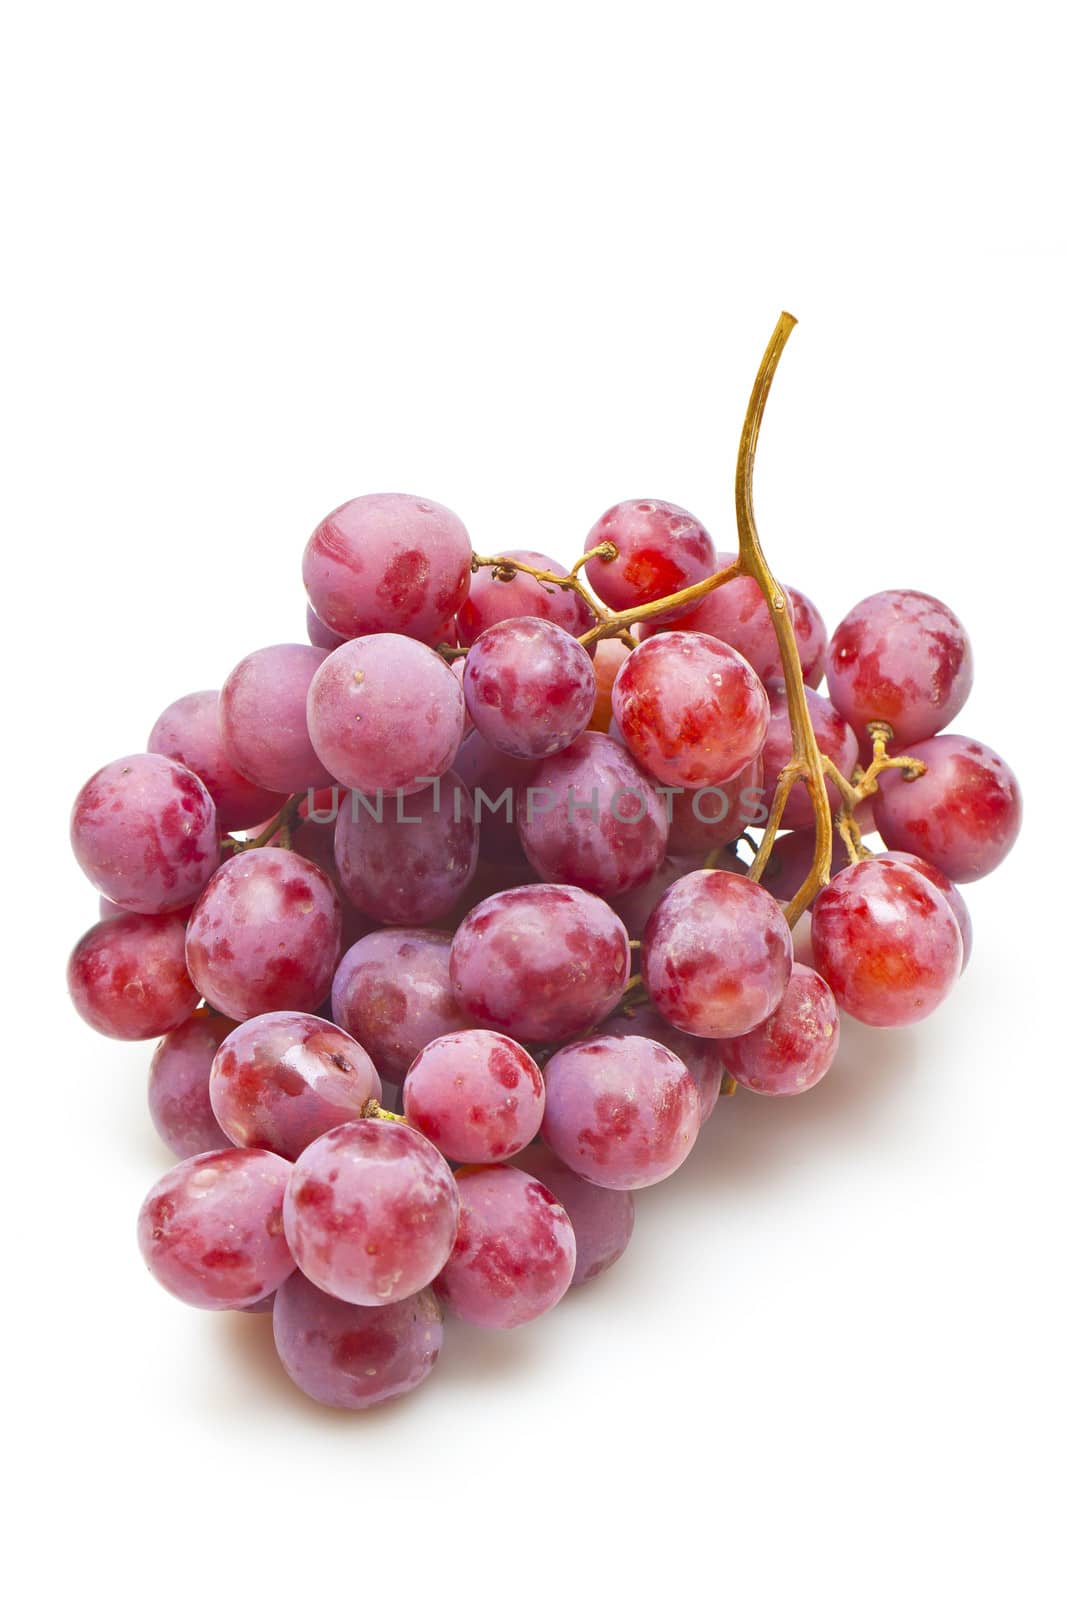 Red grapes isolated on white by kawing921